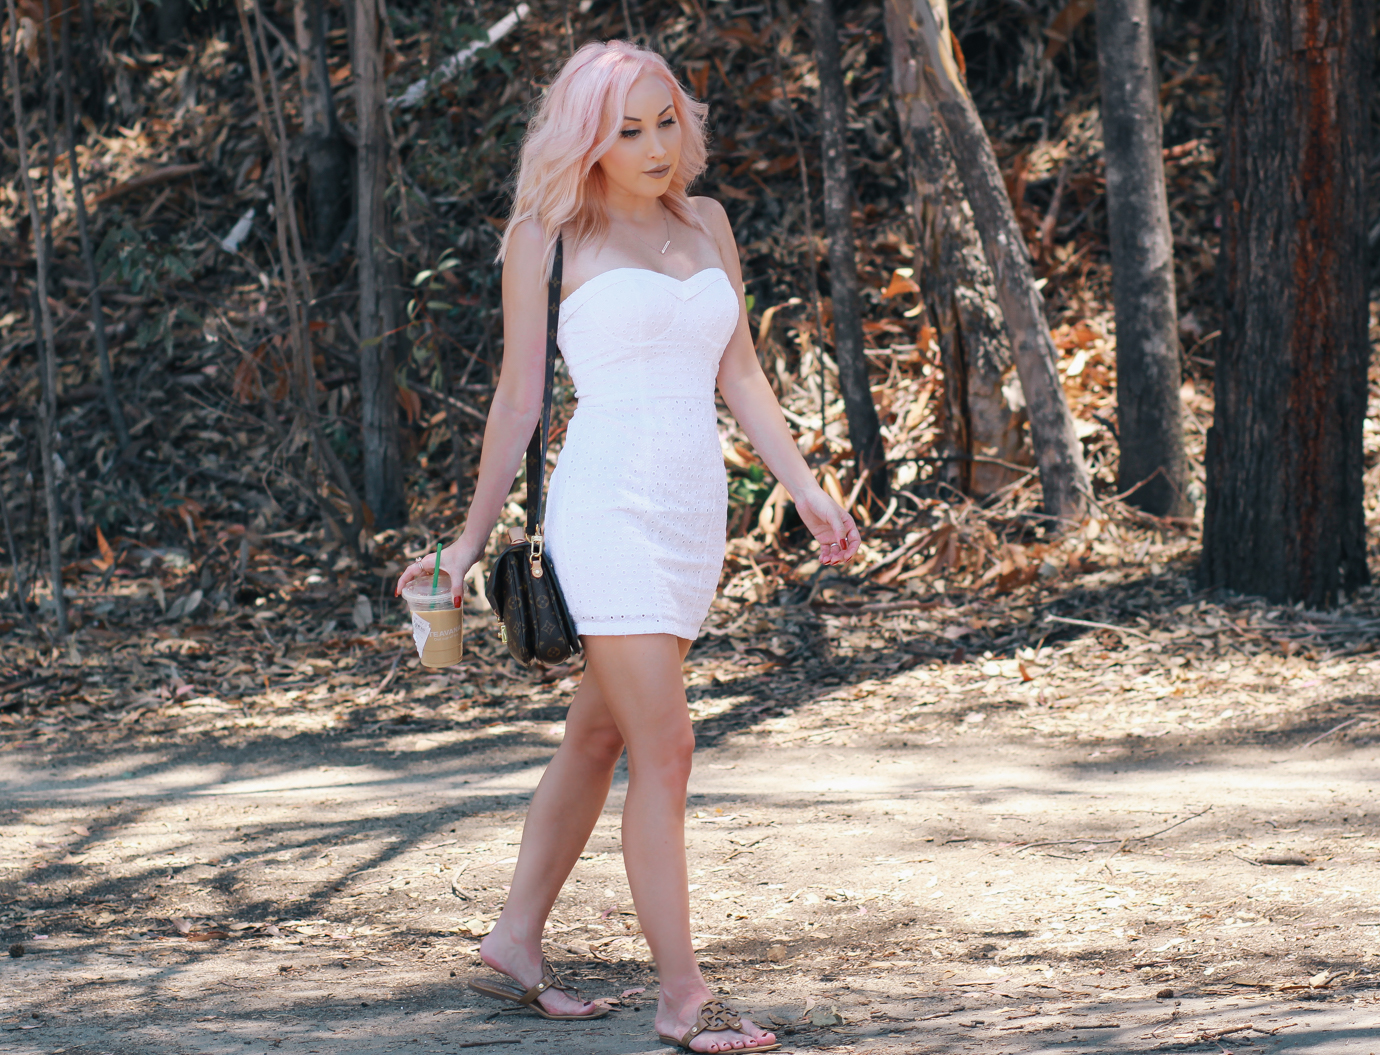 Blondie in the City | Pastel Pink Hair | Life Is Too Short To Have Boring Hair | White Summer Dress 